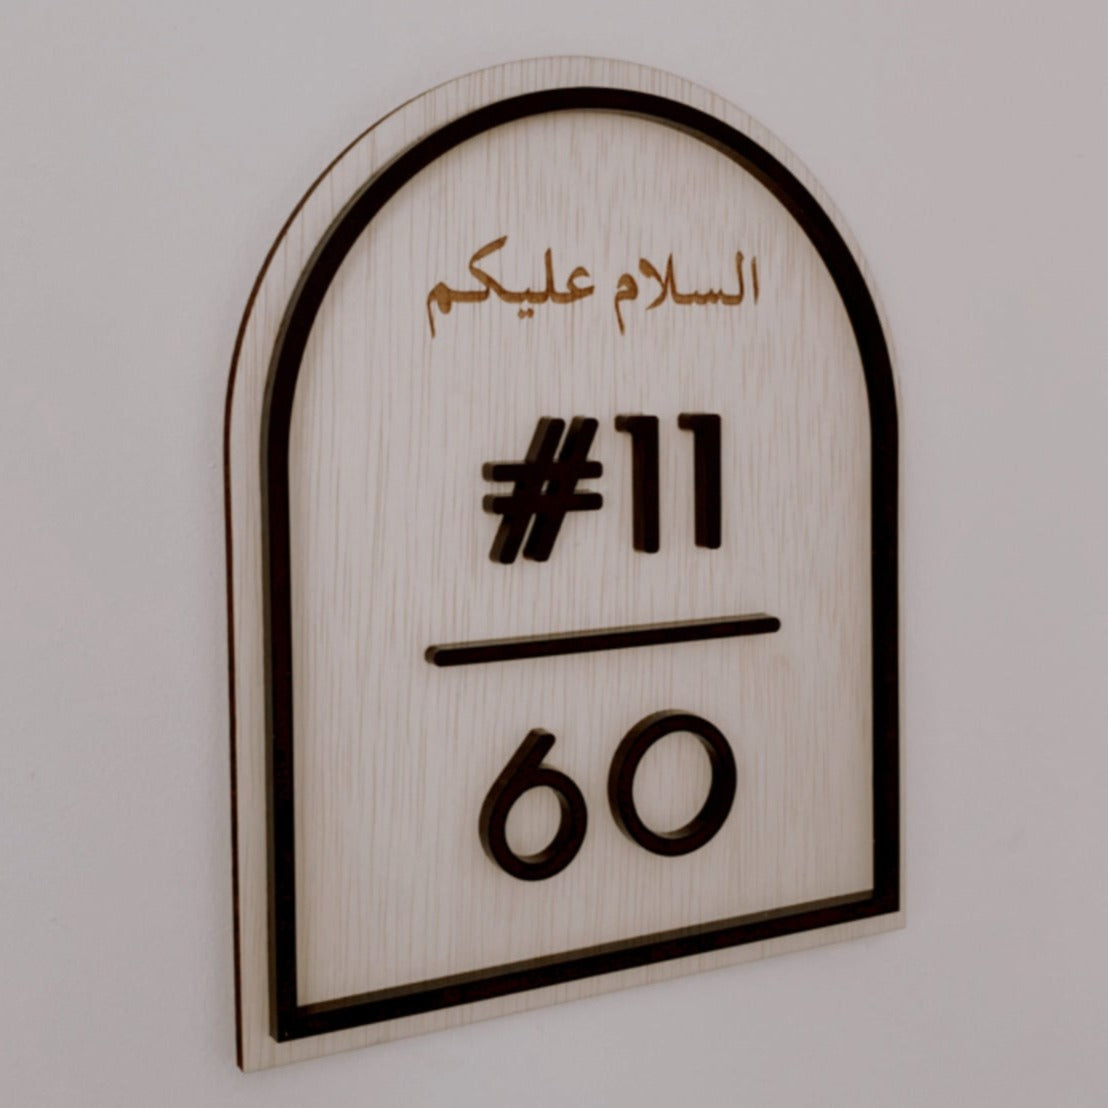 CHLOE Unit Number Sign (with engraved small text)